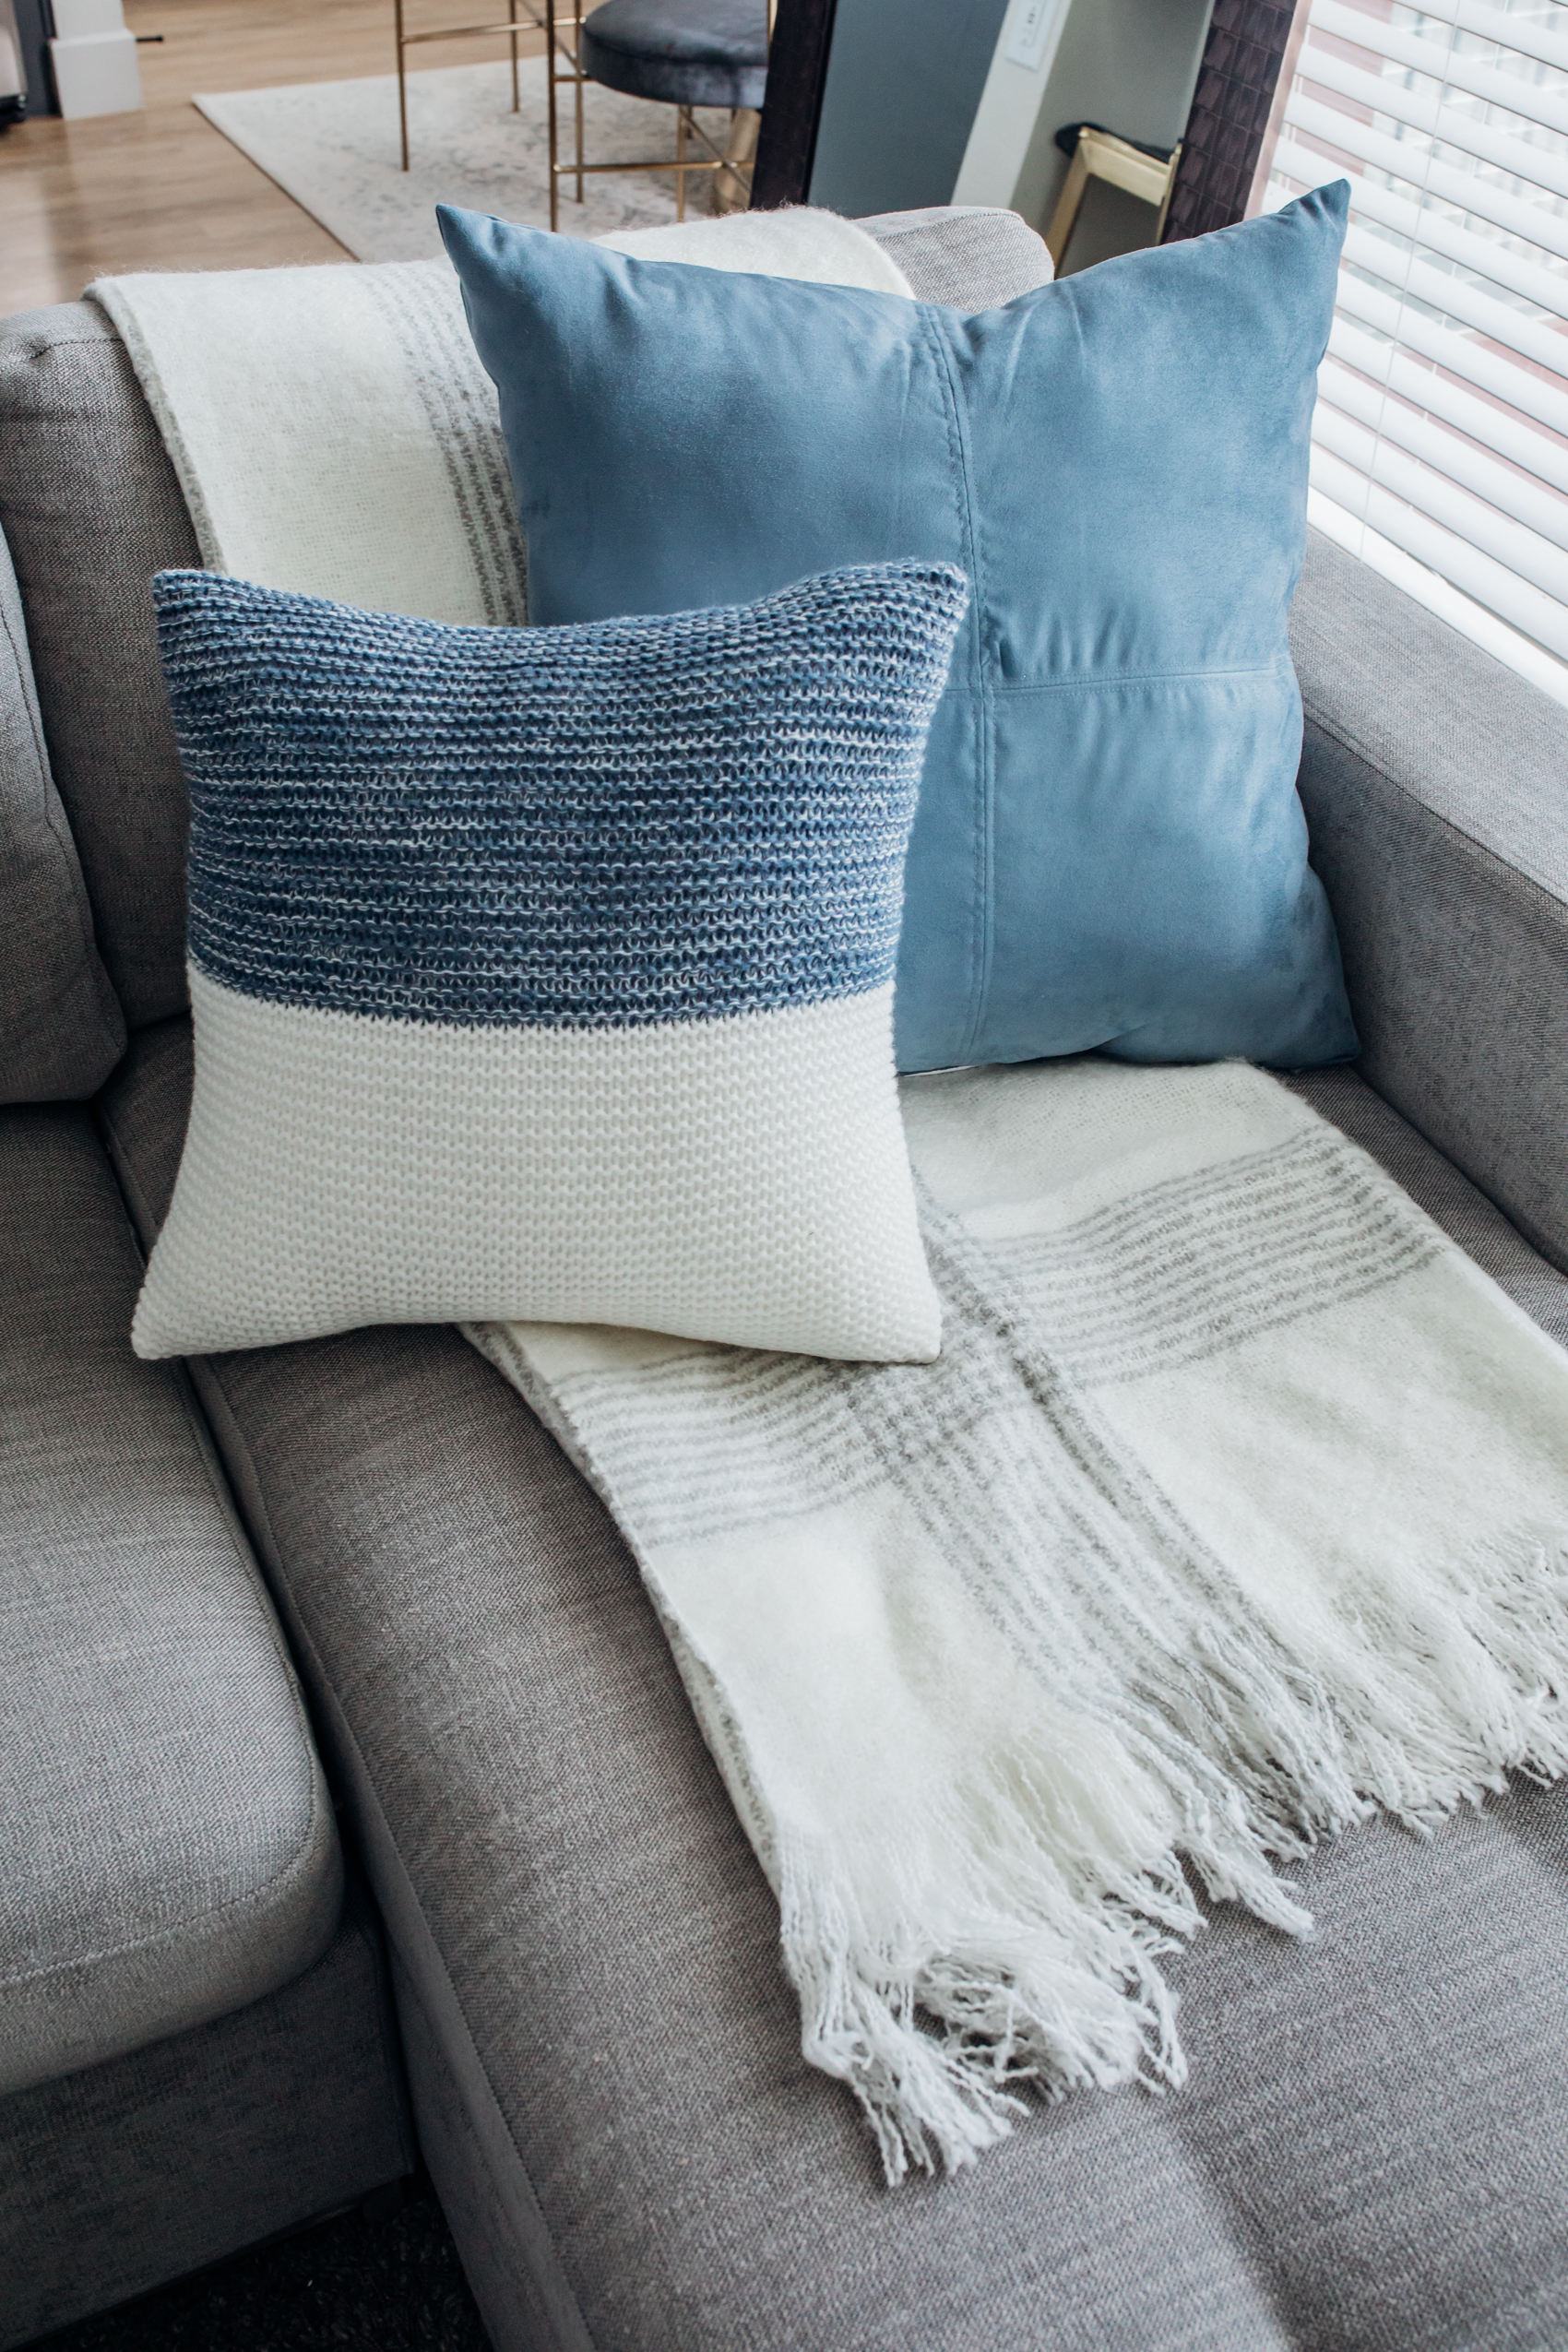 Cozy living room decor with blue and cream throw pillows and a striped throw blanket